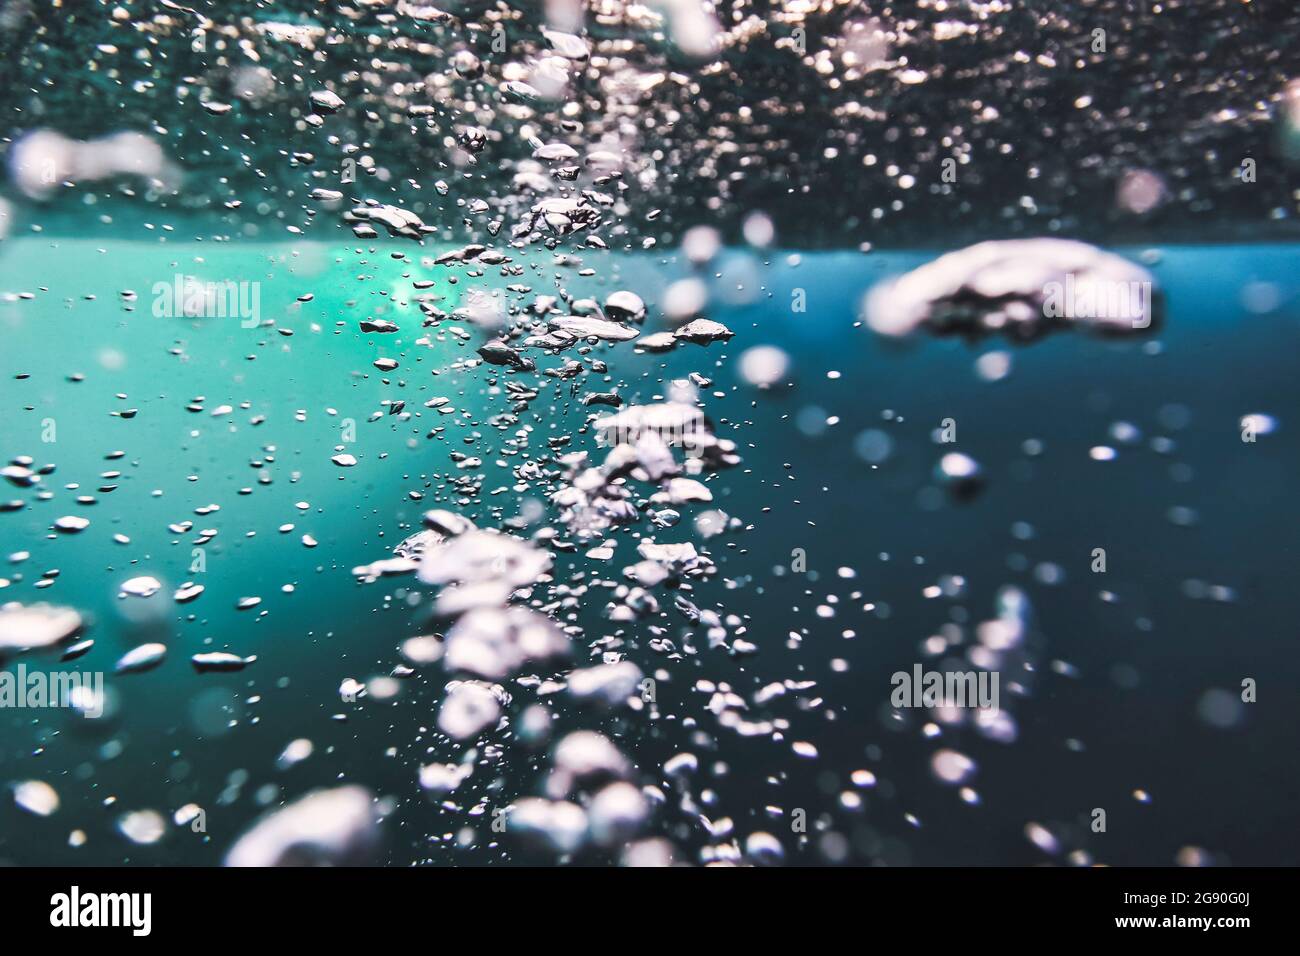 Undersea view of floating bubbles Stock Photo